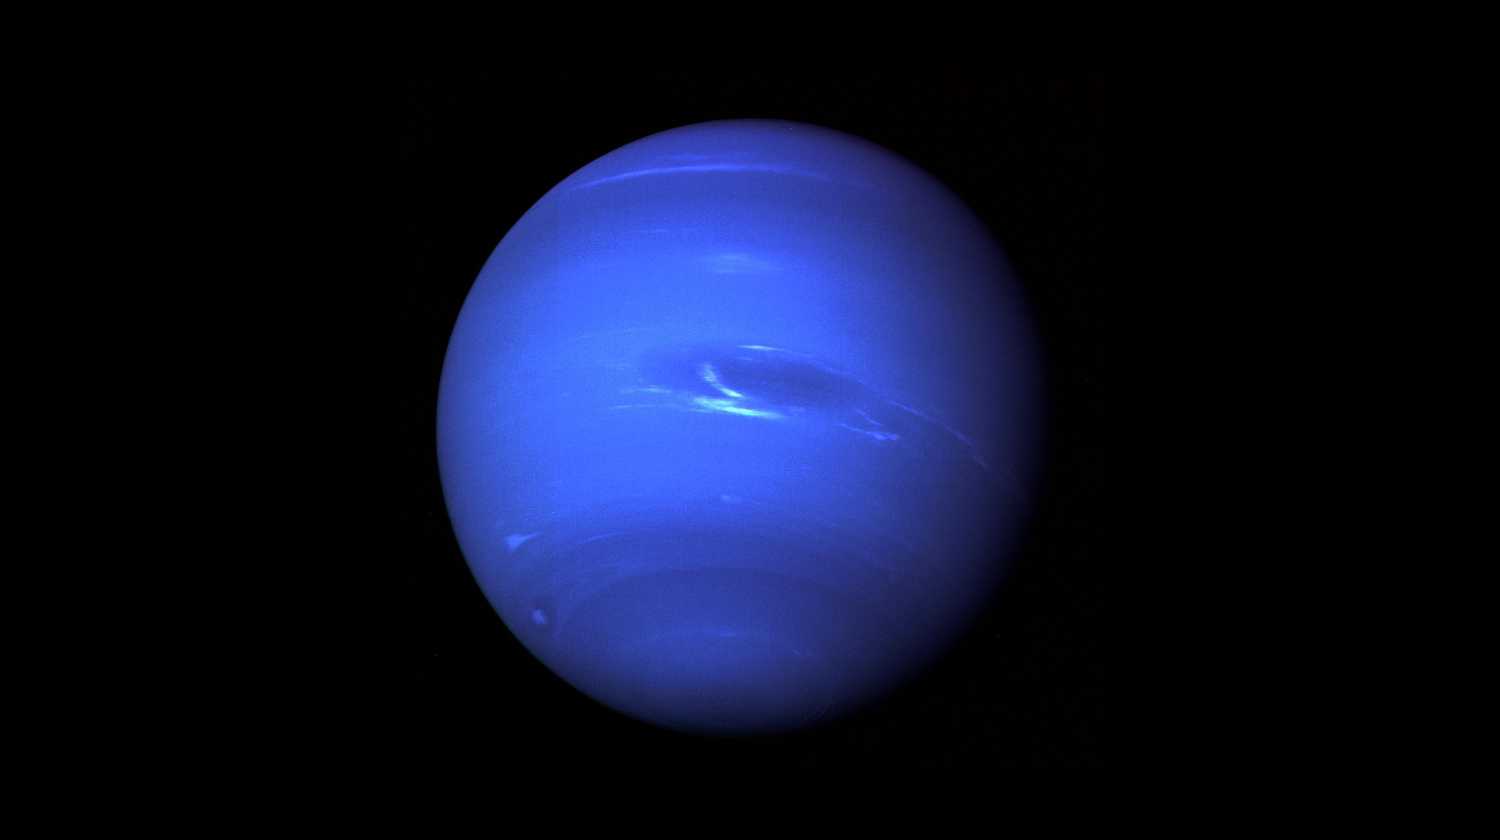 They discovered a strange dark spot on the surface of Neptune that surprised scientists